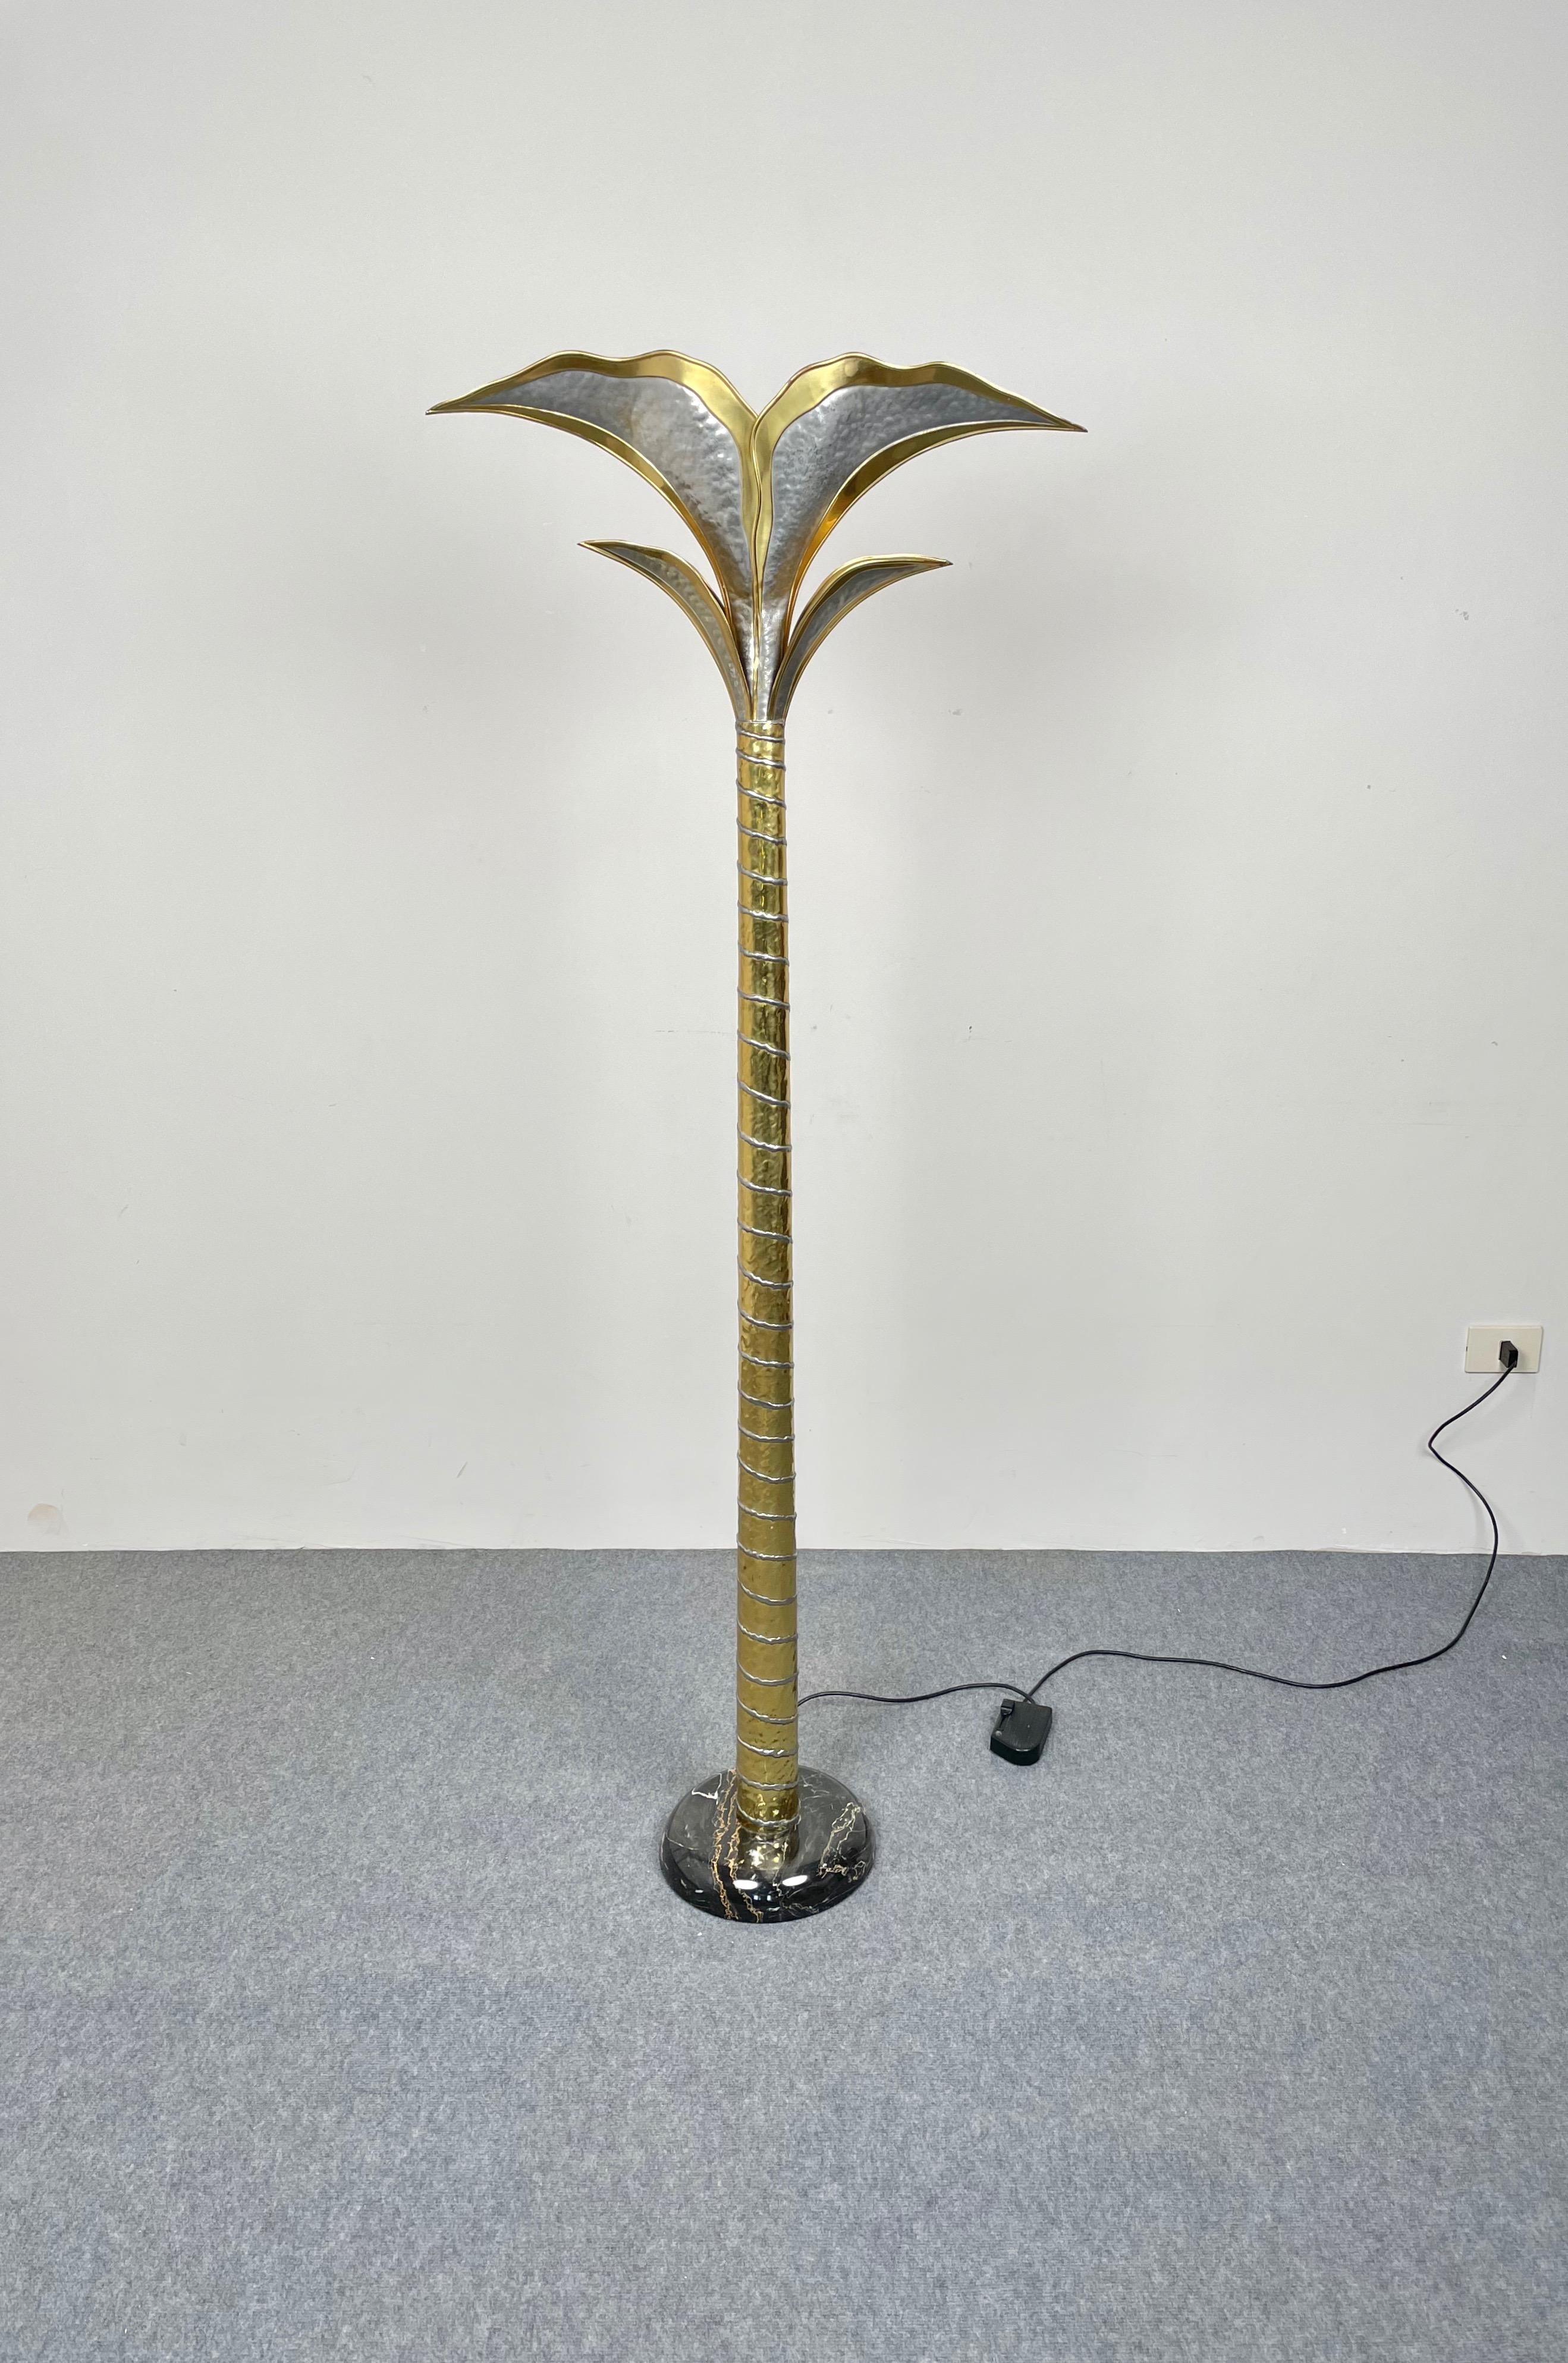 1970s sculptural floor lamp in brass and nickel featuring a black marble base by the French designer Henri Fernandez for Maison Honore. 

The piece, made largely from quality brass and steel, resembles a palm tree or similar tropical plant. Brass